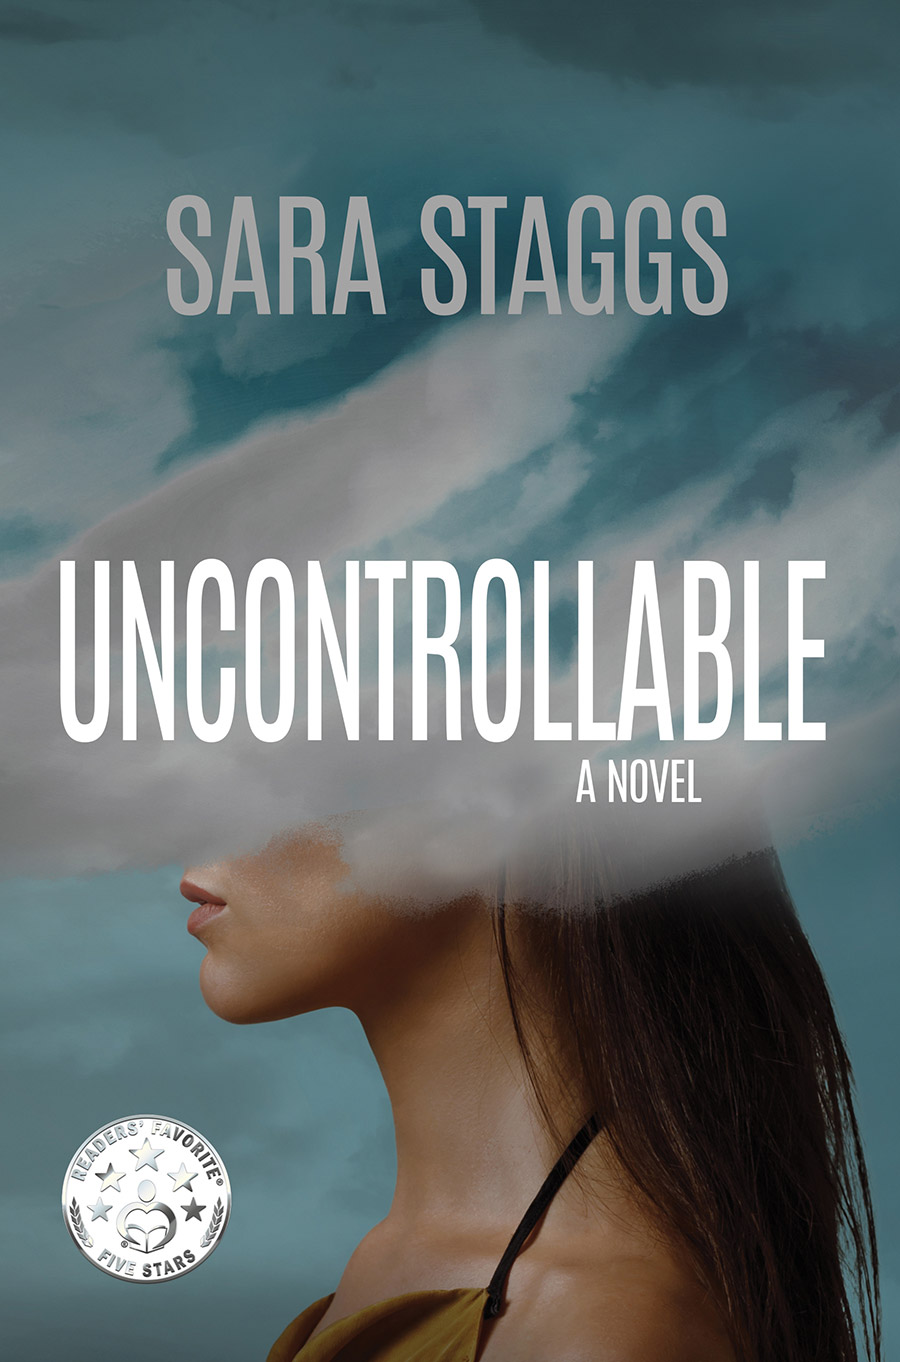 Uncontrollable by Sara Staggs novel book cover 